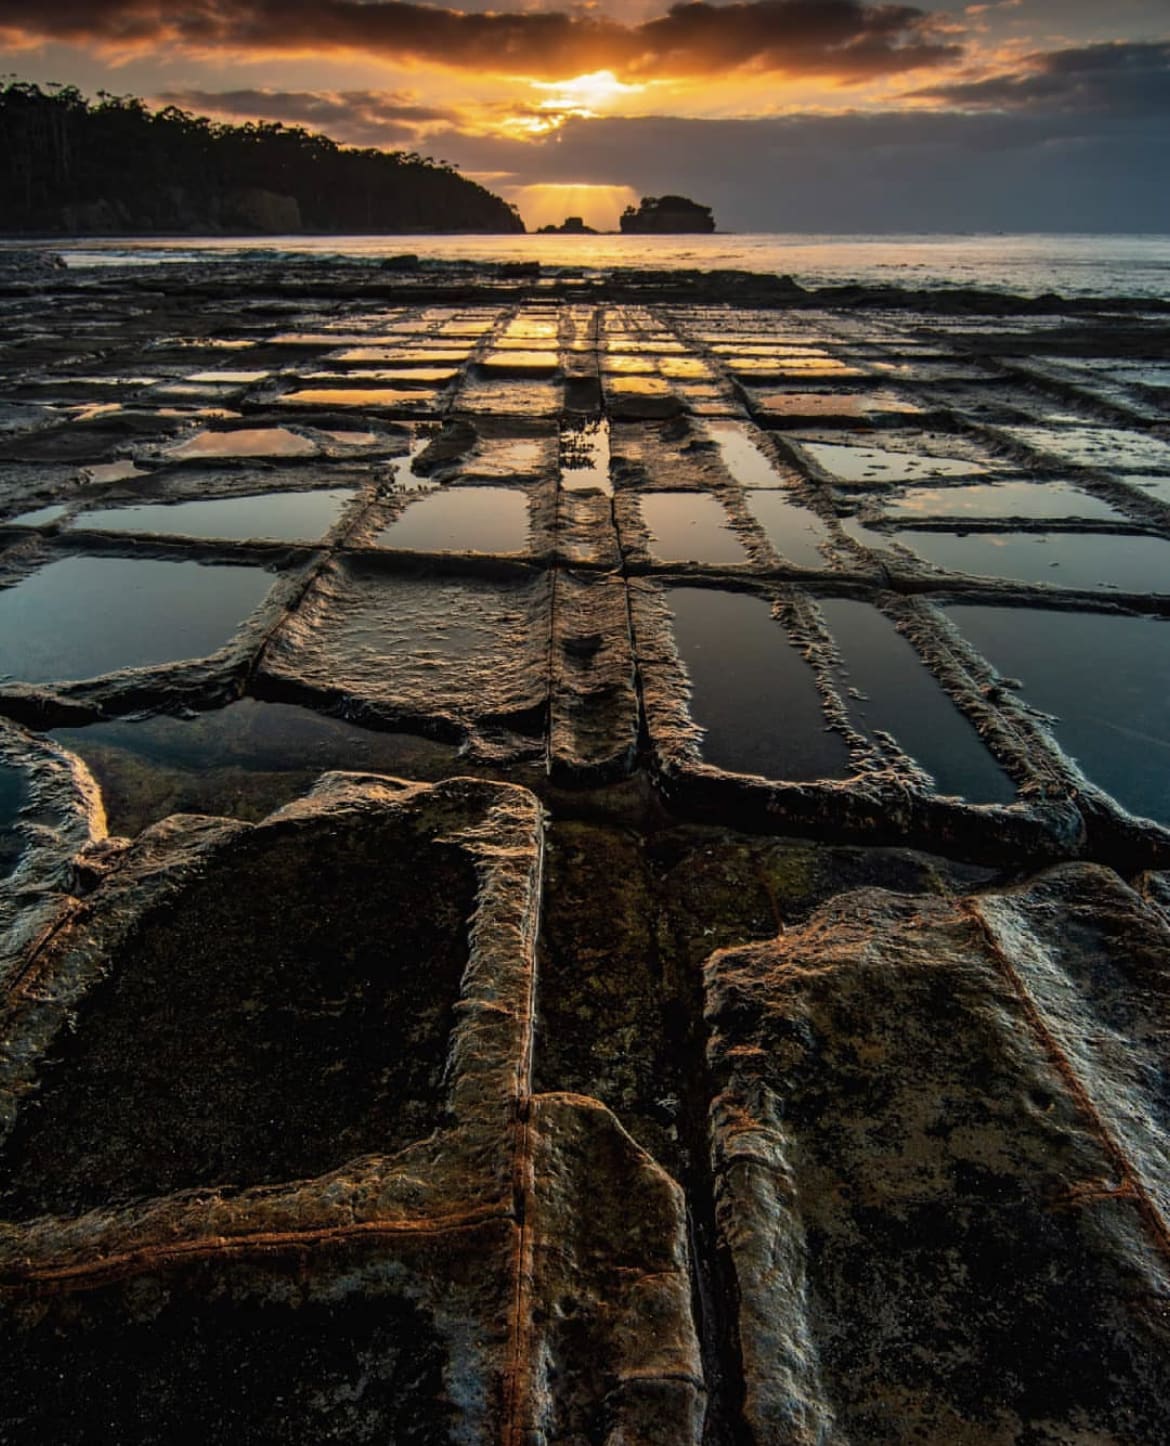 Tessellated pavement, Eaglehawk Neck - 15 Best Things To Do In Tasmania